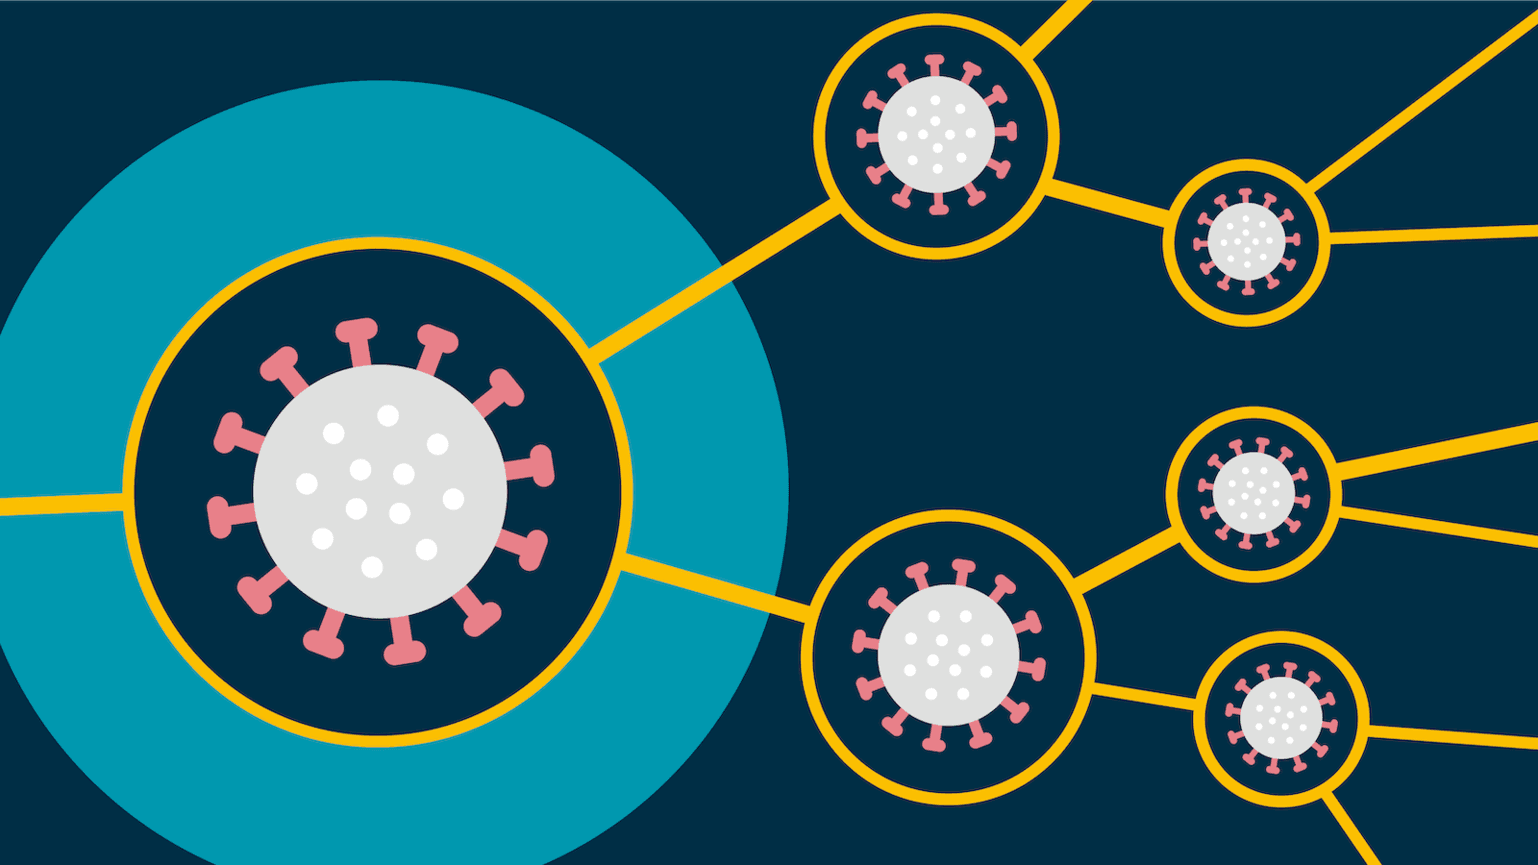 A large virus is on the left of the image on a light blue background, it connects out to the left, via orange lines, to other viruses with slight difference in shape.